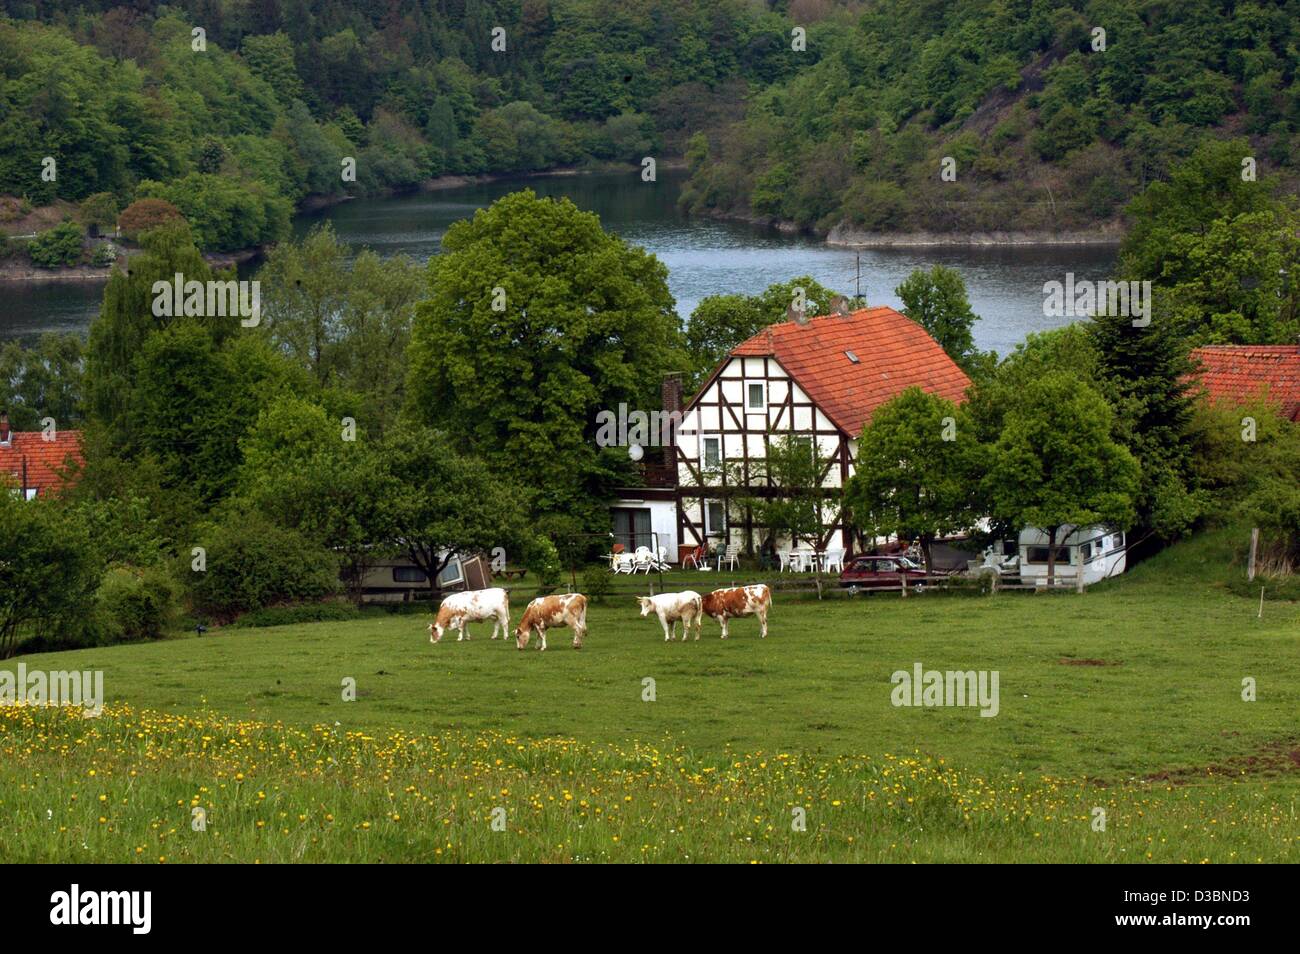 (dpa) - A view of Asel on Edersee Lake, central Germany, 14 May 2003. The region of the Kellerwald Forest is to be declared a National Park, the regional government of the state of Hesse declared in March 2003. The park will comprise a surface of 5,700 hectar south of the Edersee Lake. Stock Photo